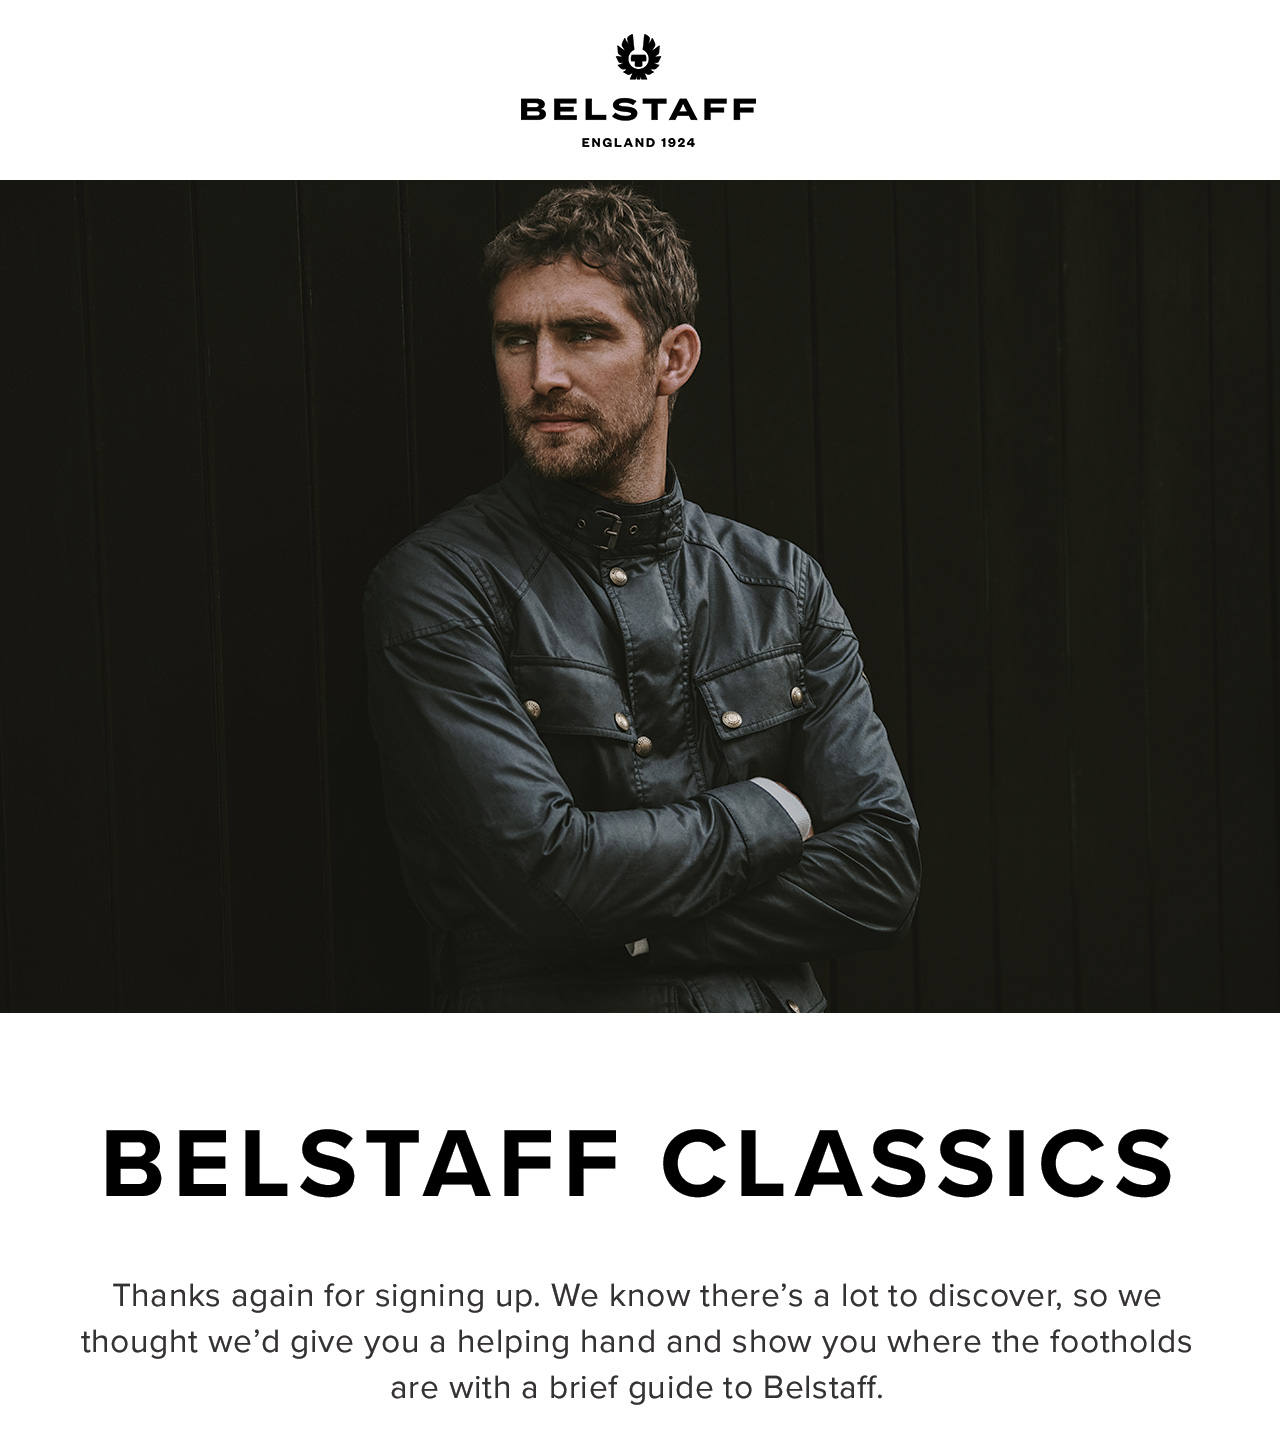 Thanks again for signing up. We know theres a lot to discover, so we thought wed give you a helping hand and show you where the footholds are with a brief guide to Belstaff.